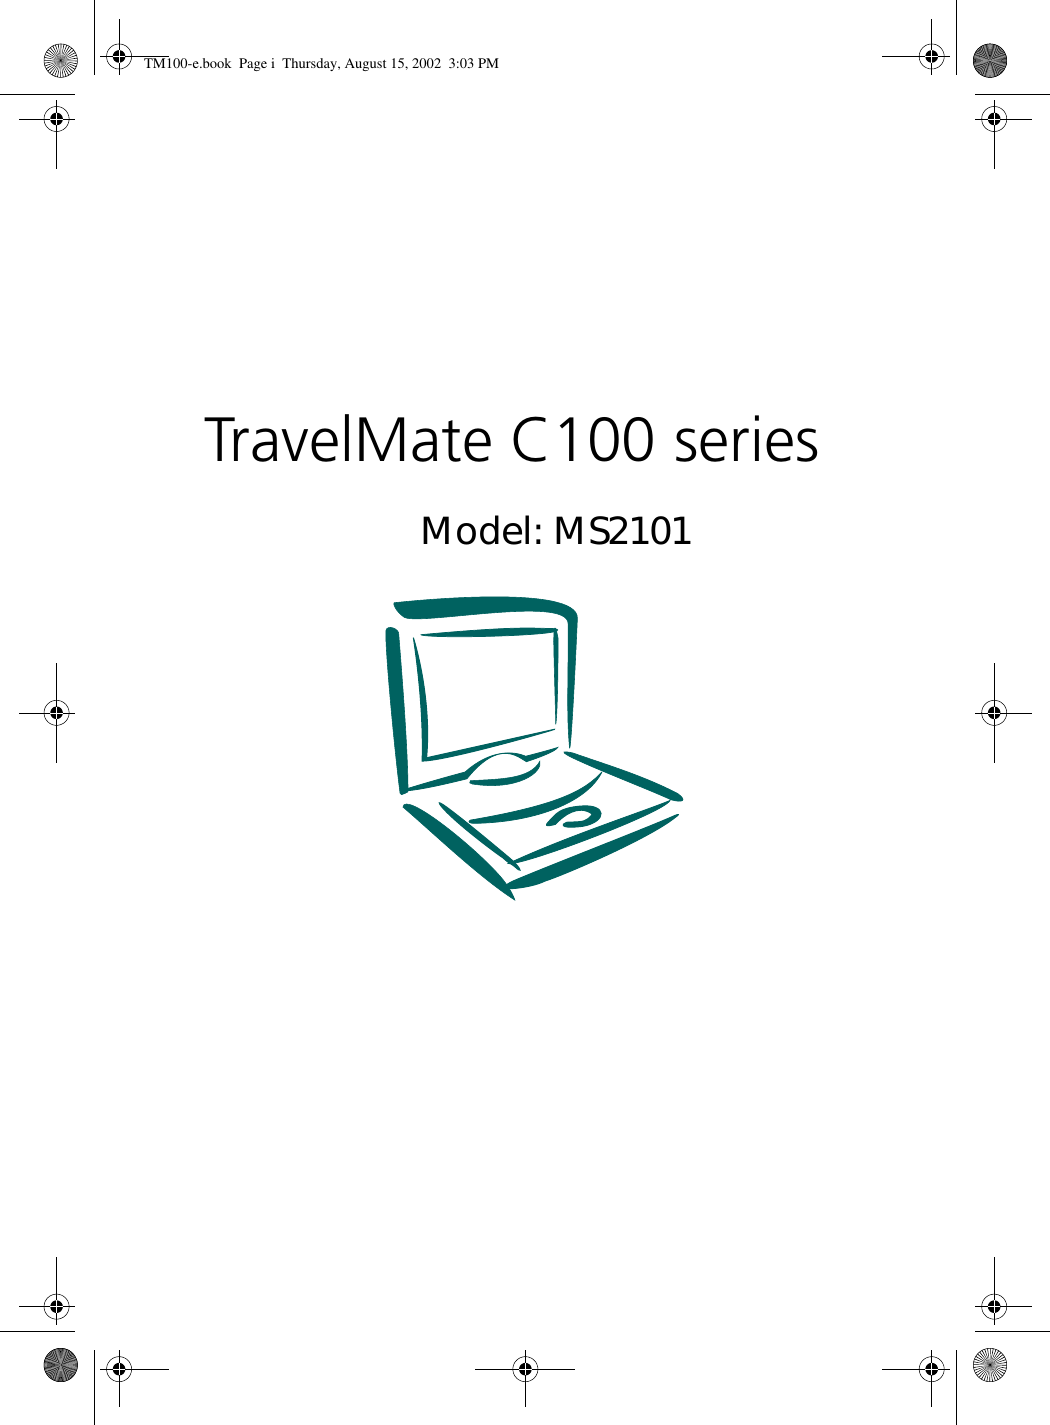 TravelMate C100 seriesModel: MS2101TM100-e.book Page i Thursday, August 15, 2002 3:03 PM